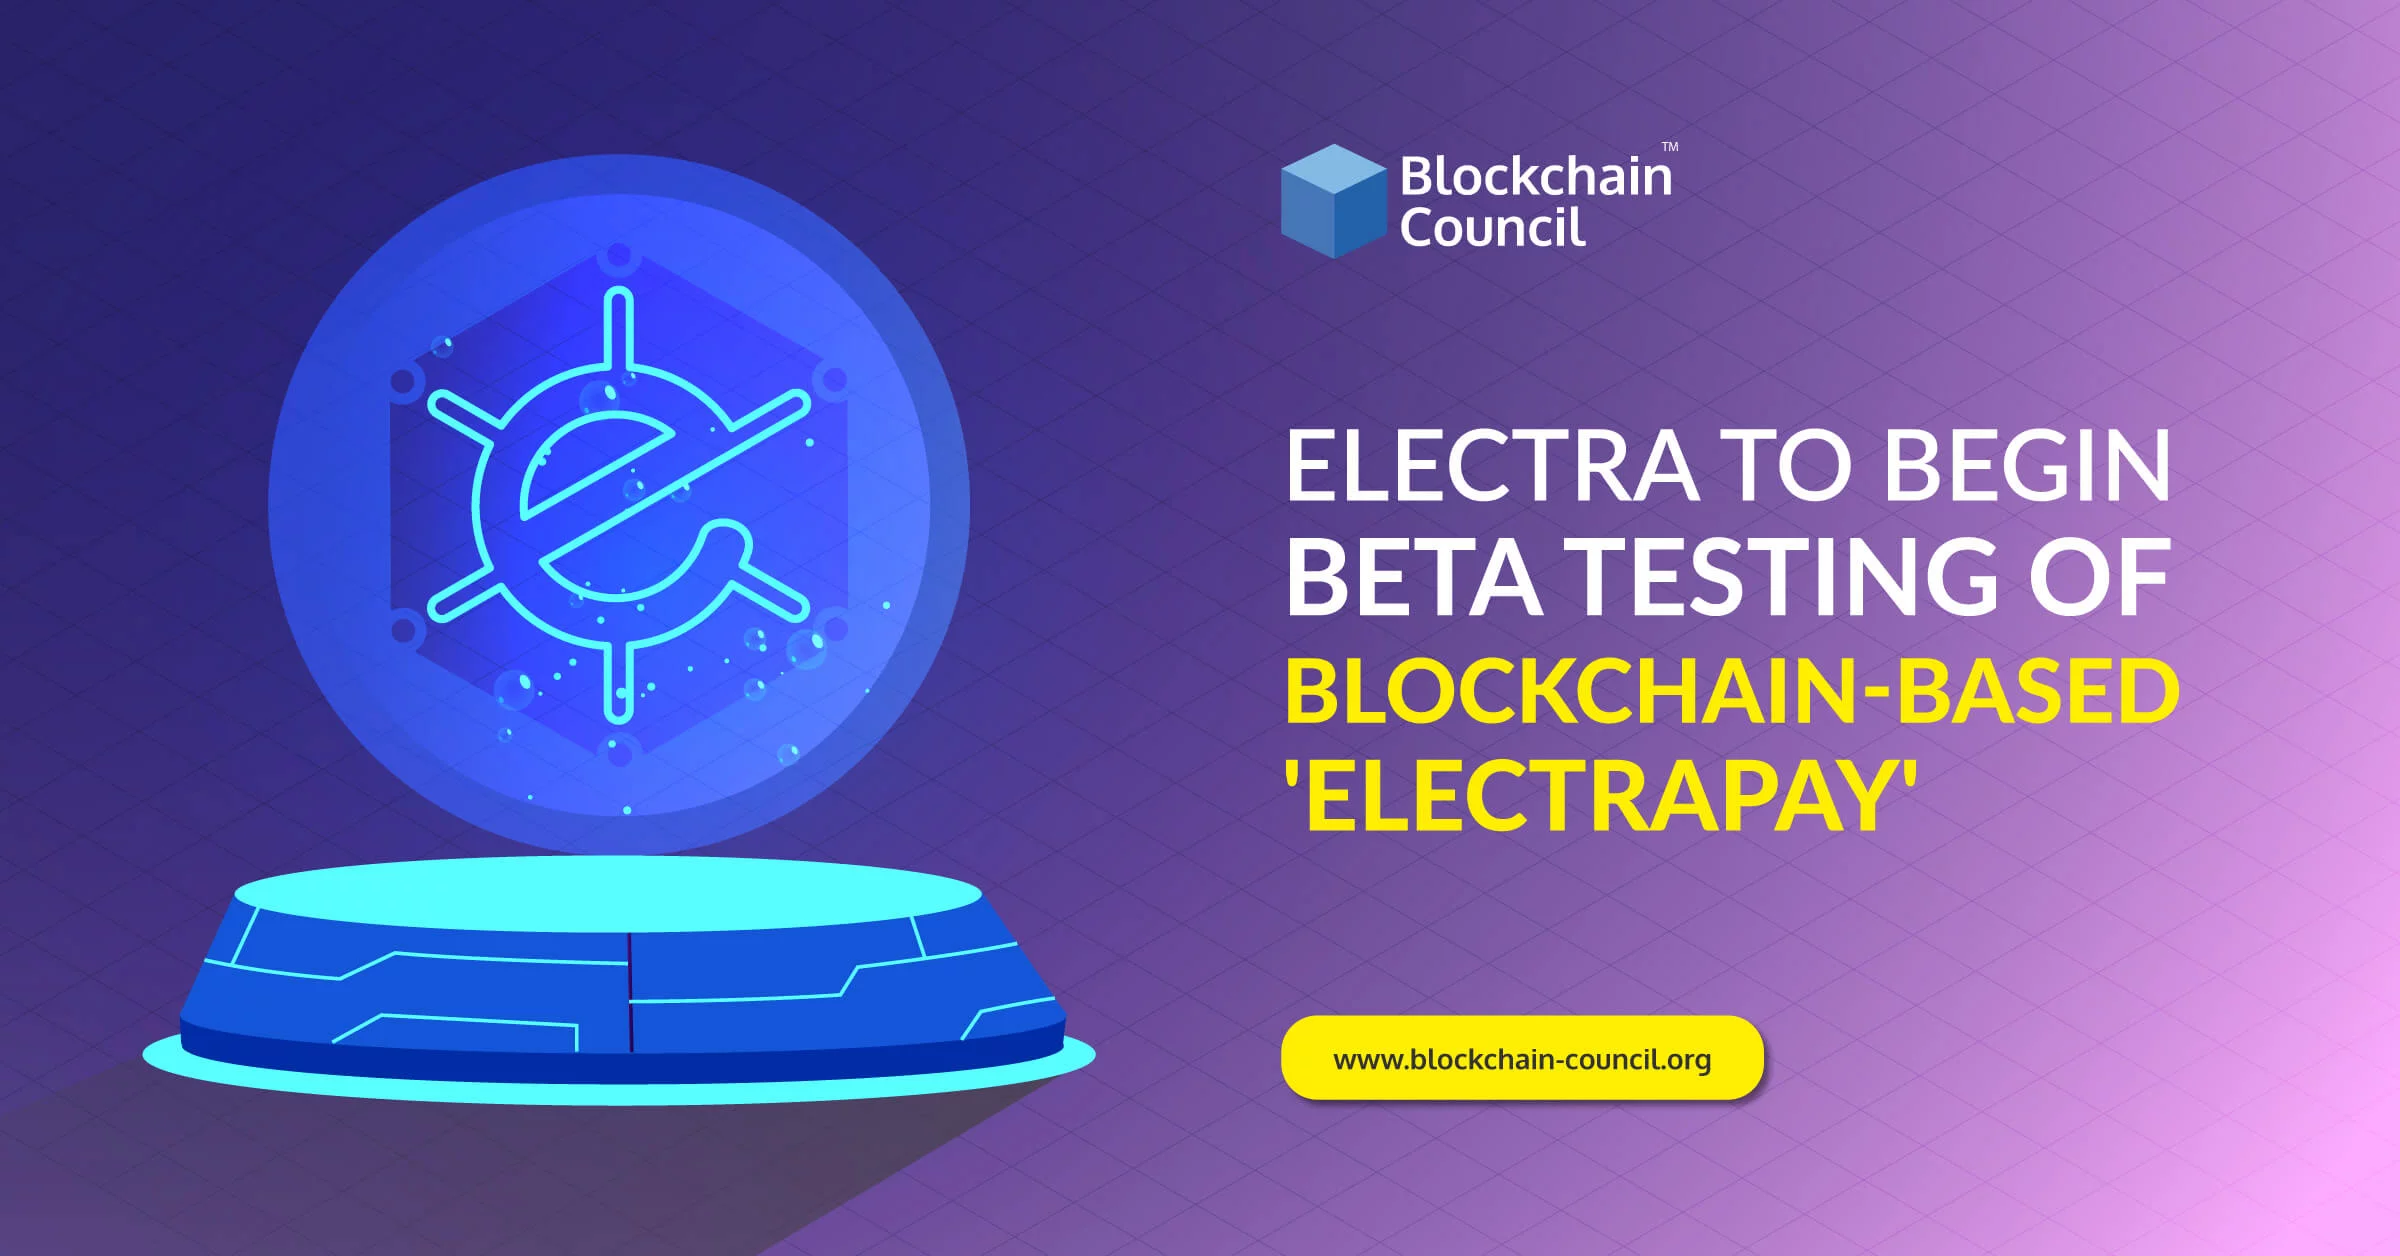 Electra to Begin Beta Testing of Blockchain-Based ‘ElectraPay’